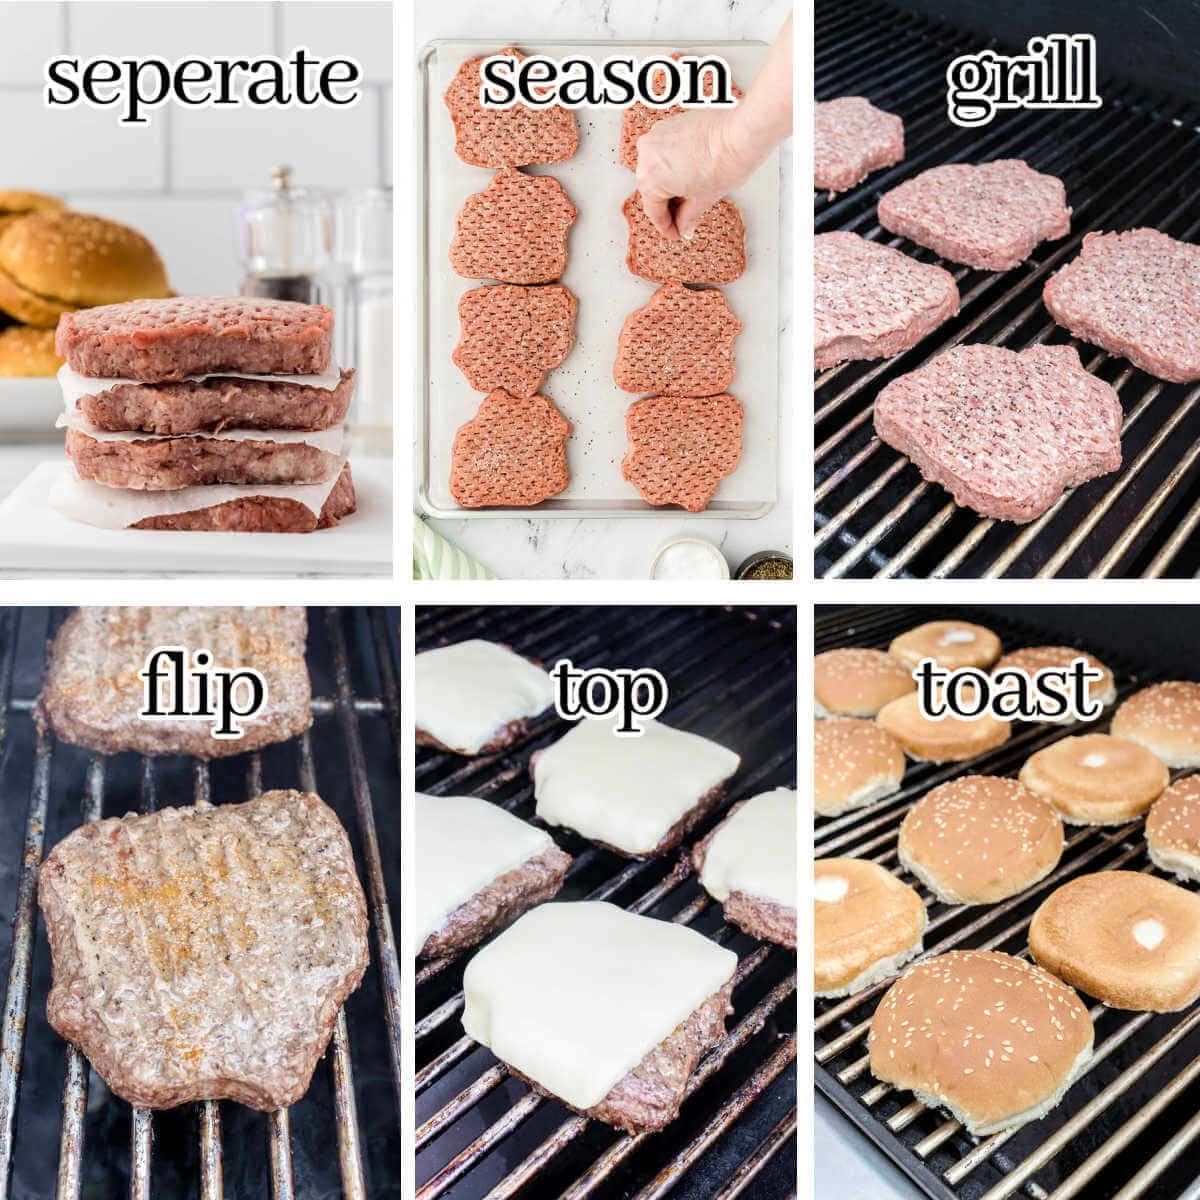 Step-by-step instructions how to bbq this recipe, with print overlay.